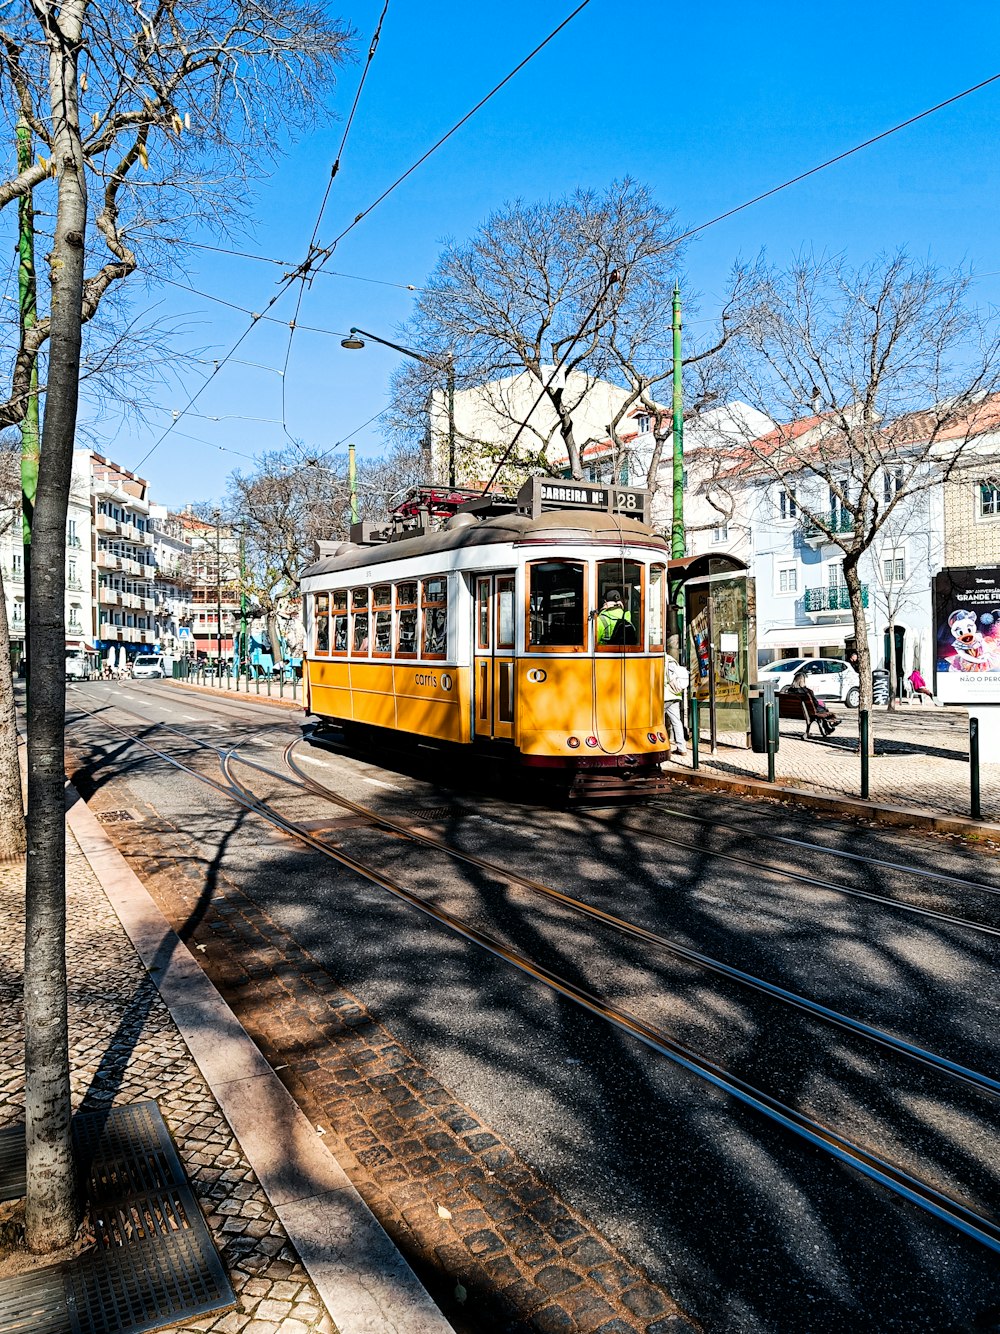 a yellow trolley car traveling down a street next to tall buildings